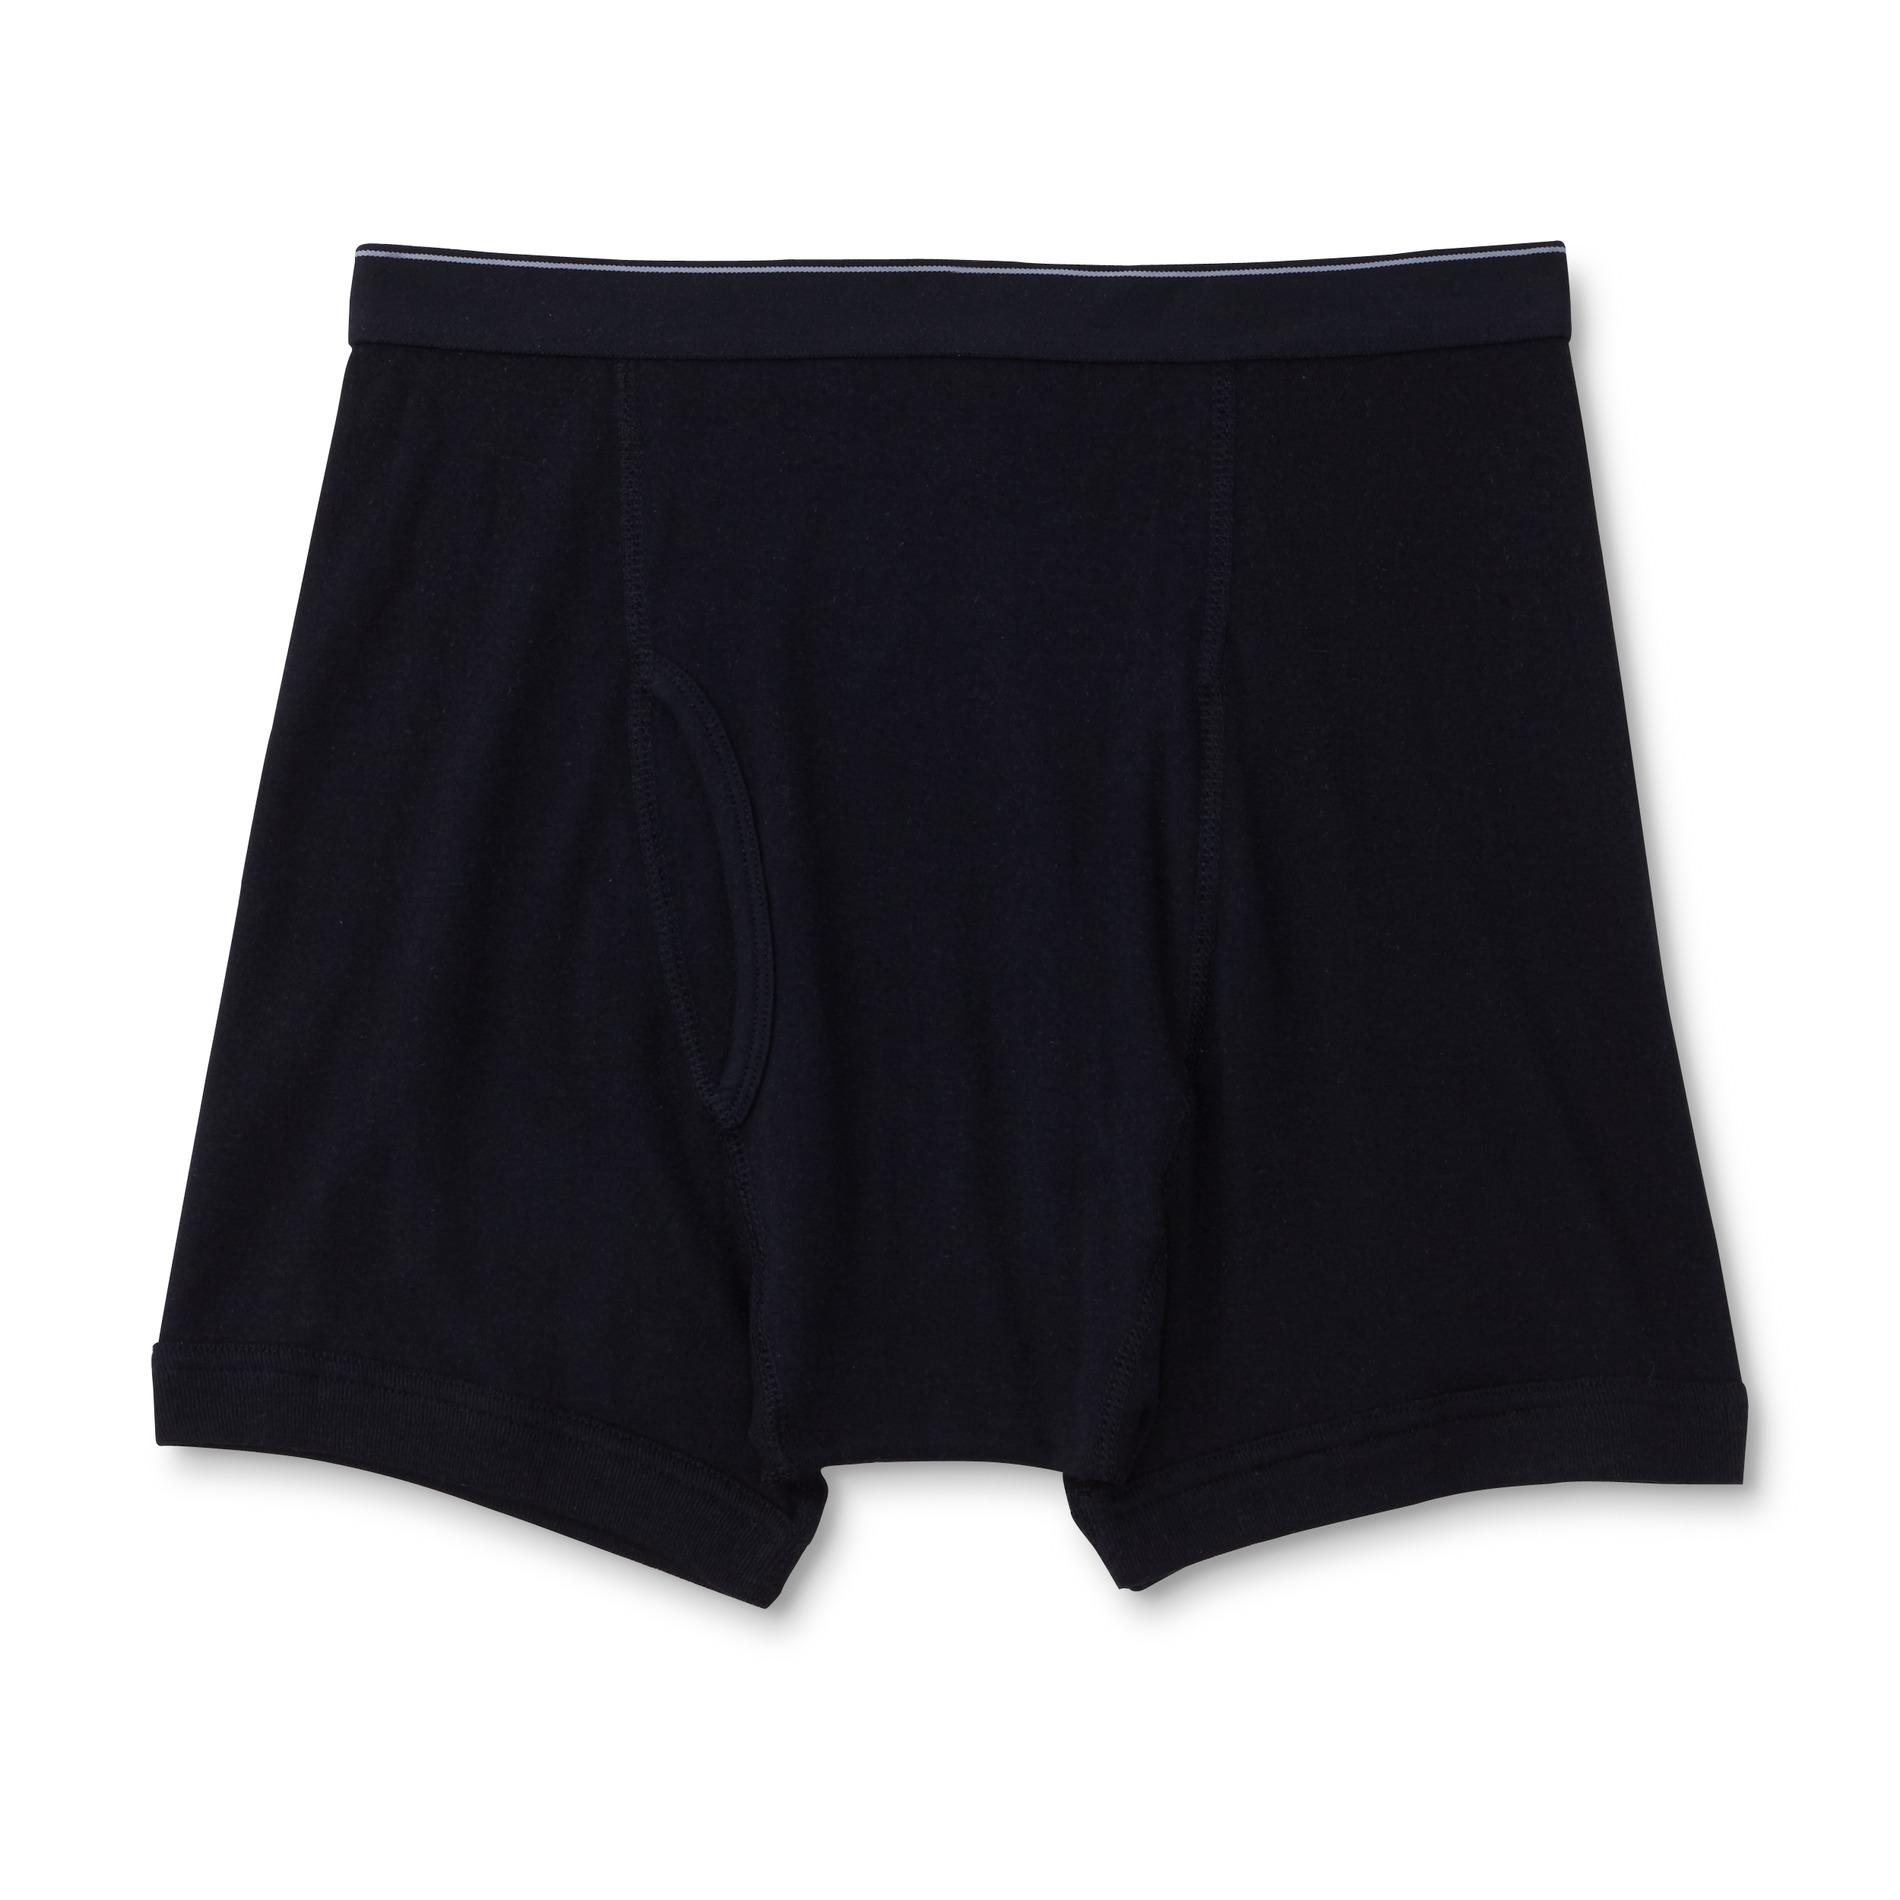 Simply Styled Men's 2-Pack Boxer Briefs